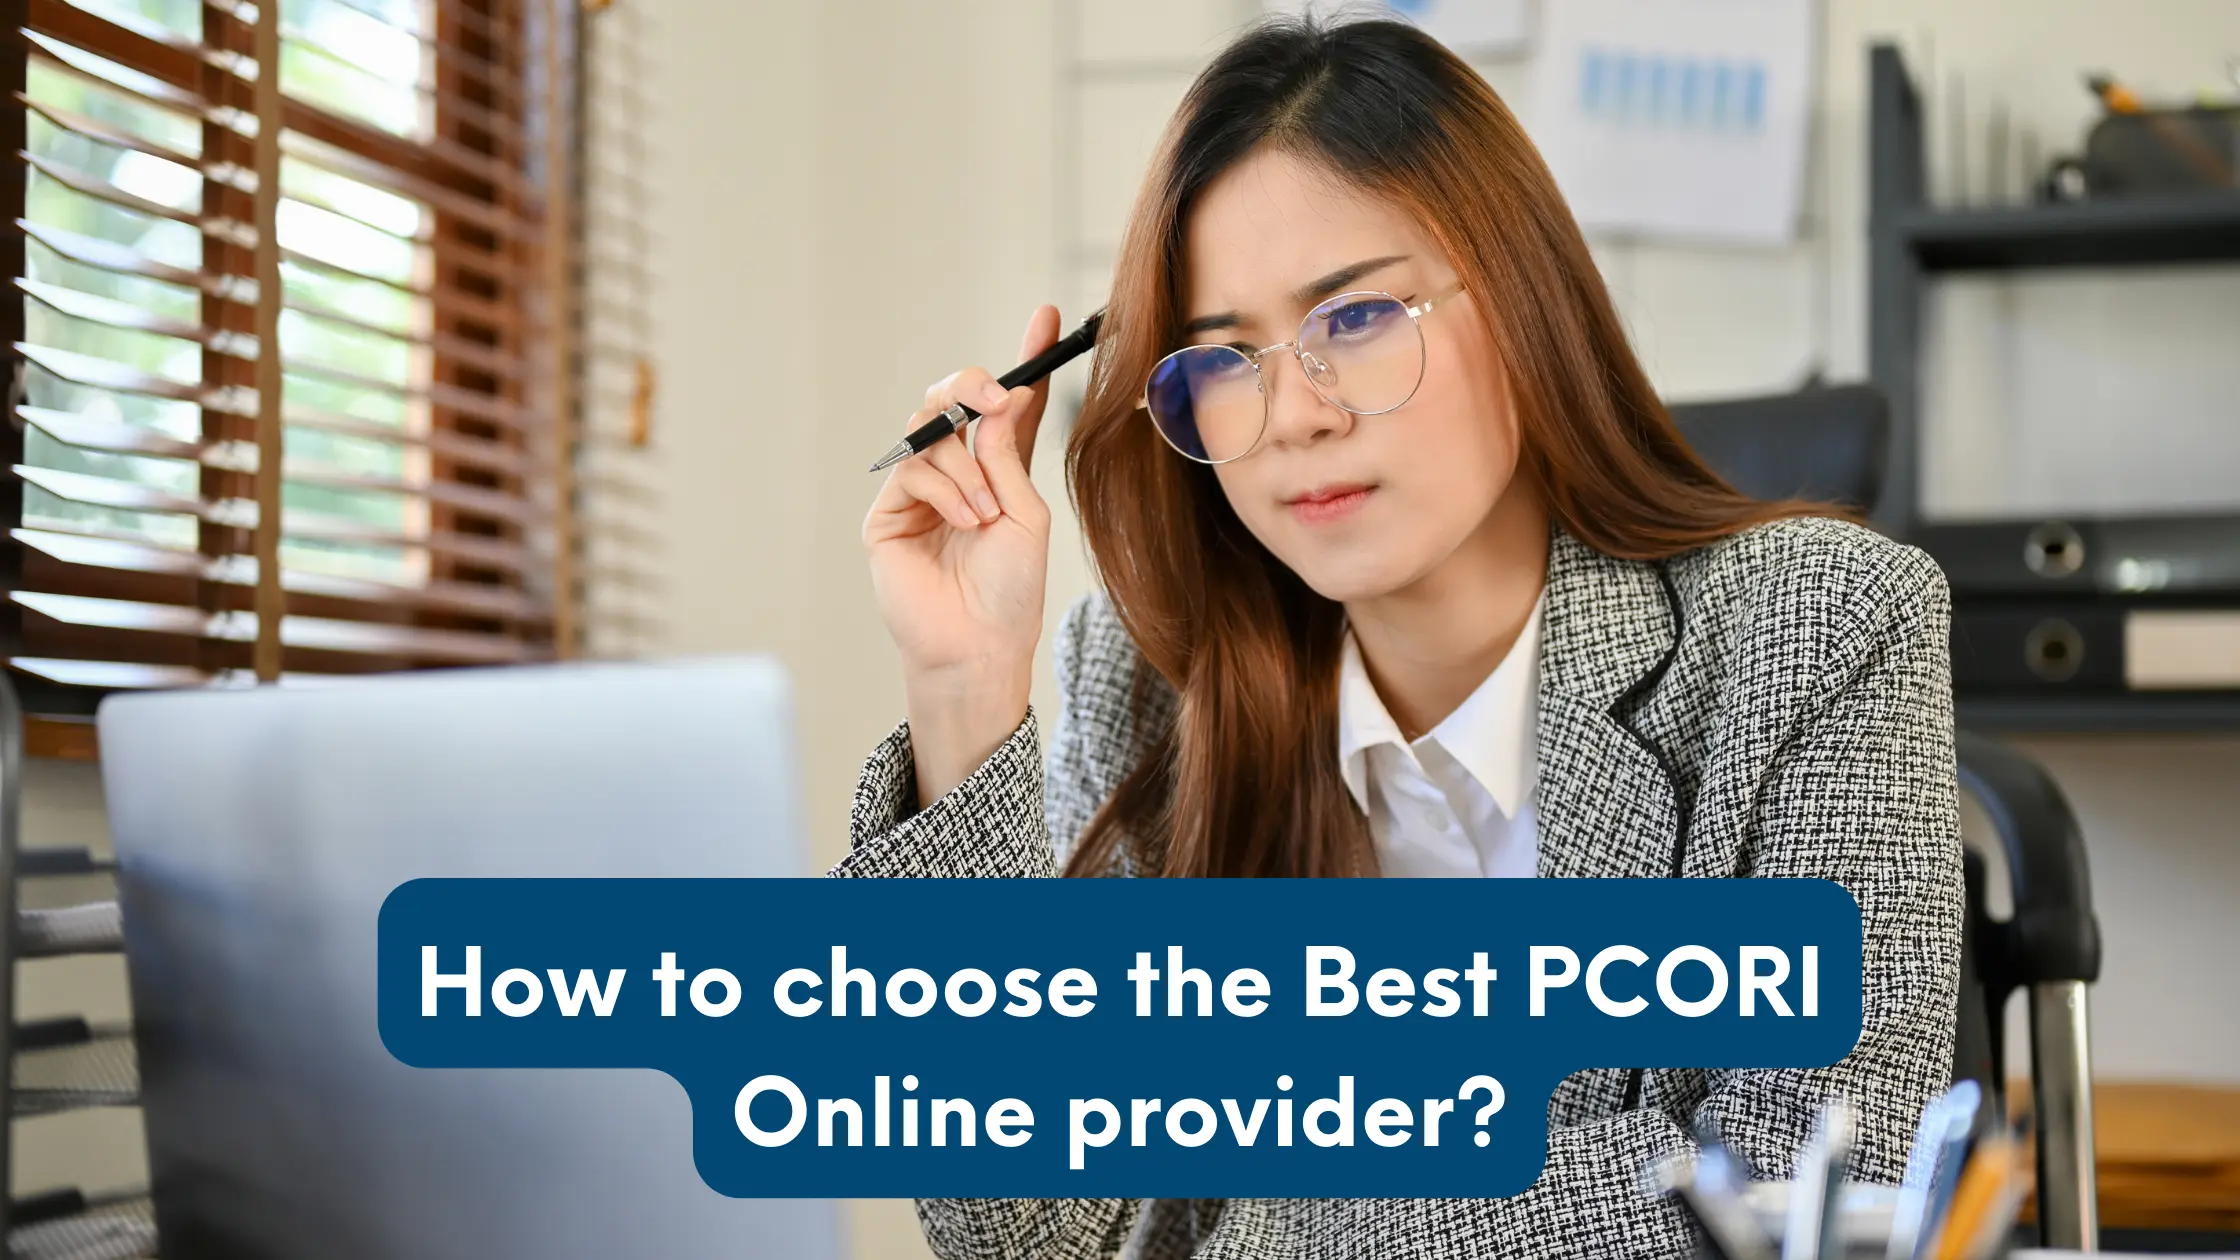 How to Choose the Best PCORI Online Provider